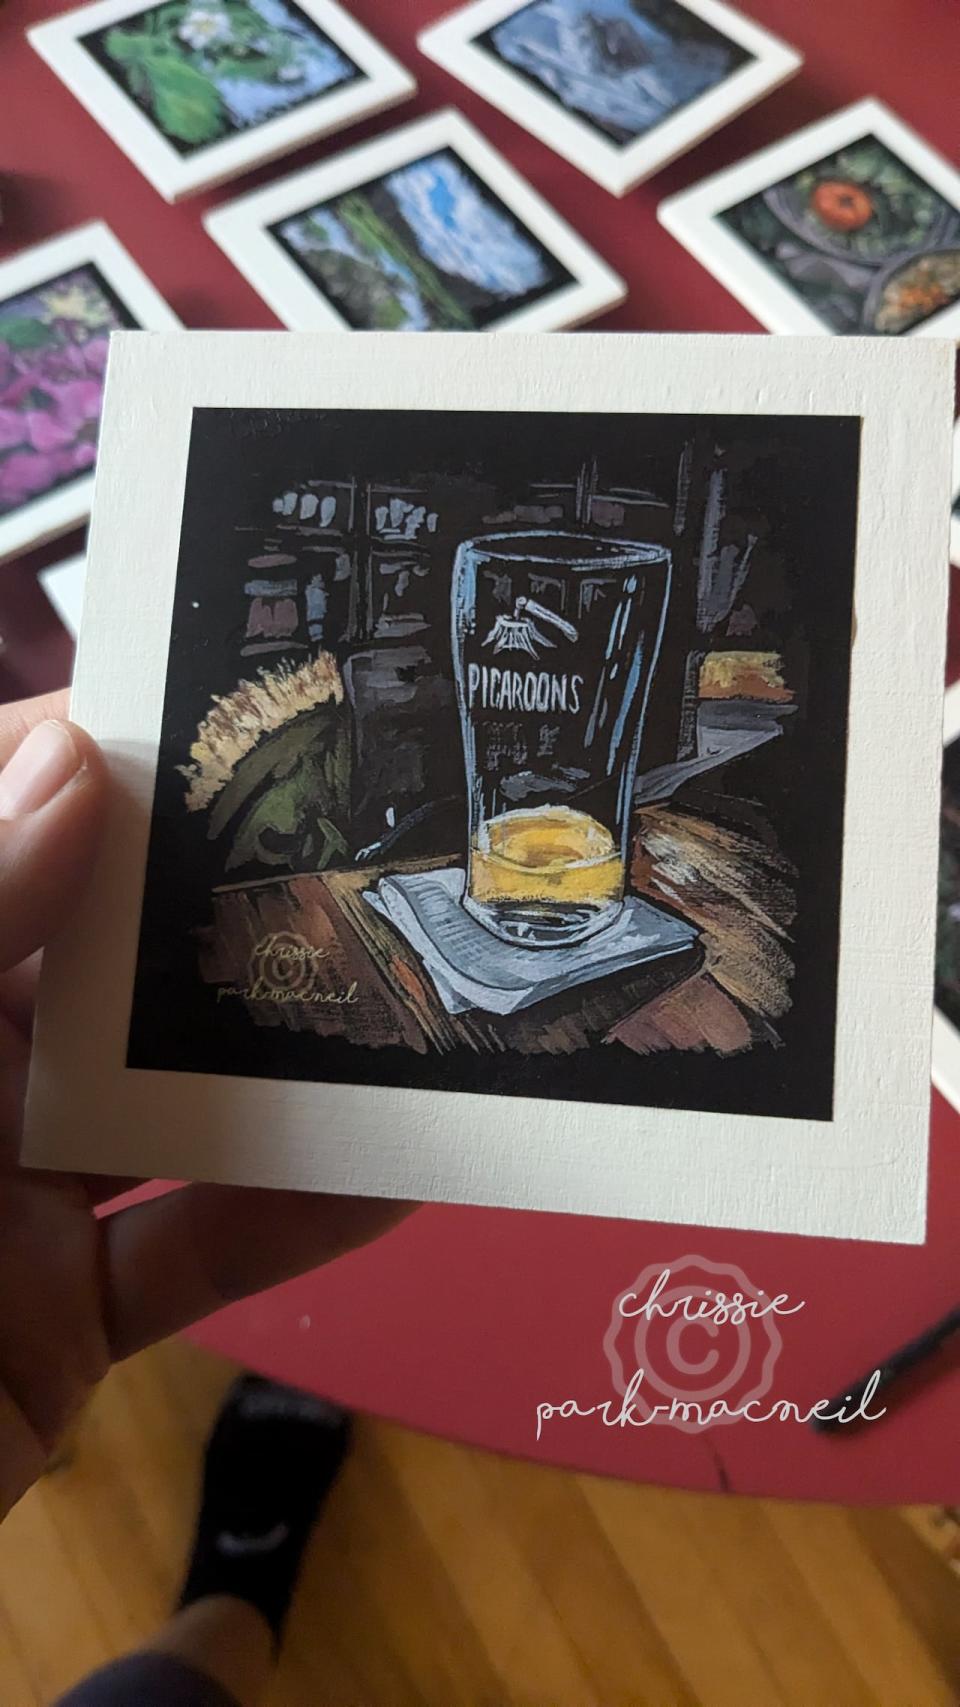 Some of the art pieces that will be hidden on Saturday include elements that will be familiar to Fredericton residents, such as this piece by Chrissie Park-MacNeil showing a mostly empty Picaroons glass. 